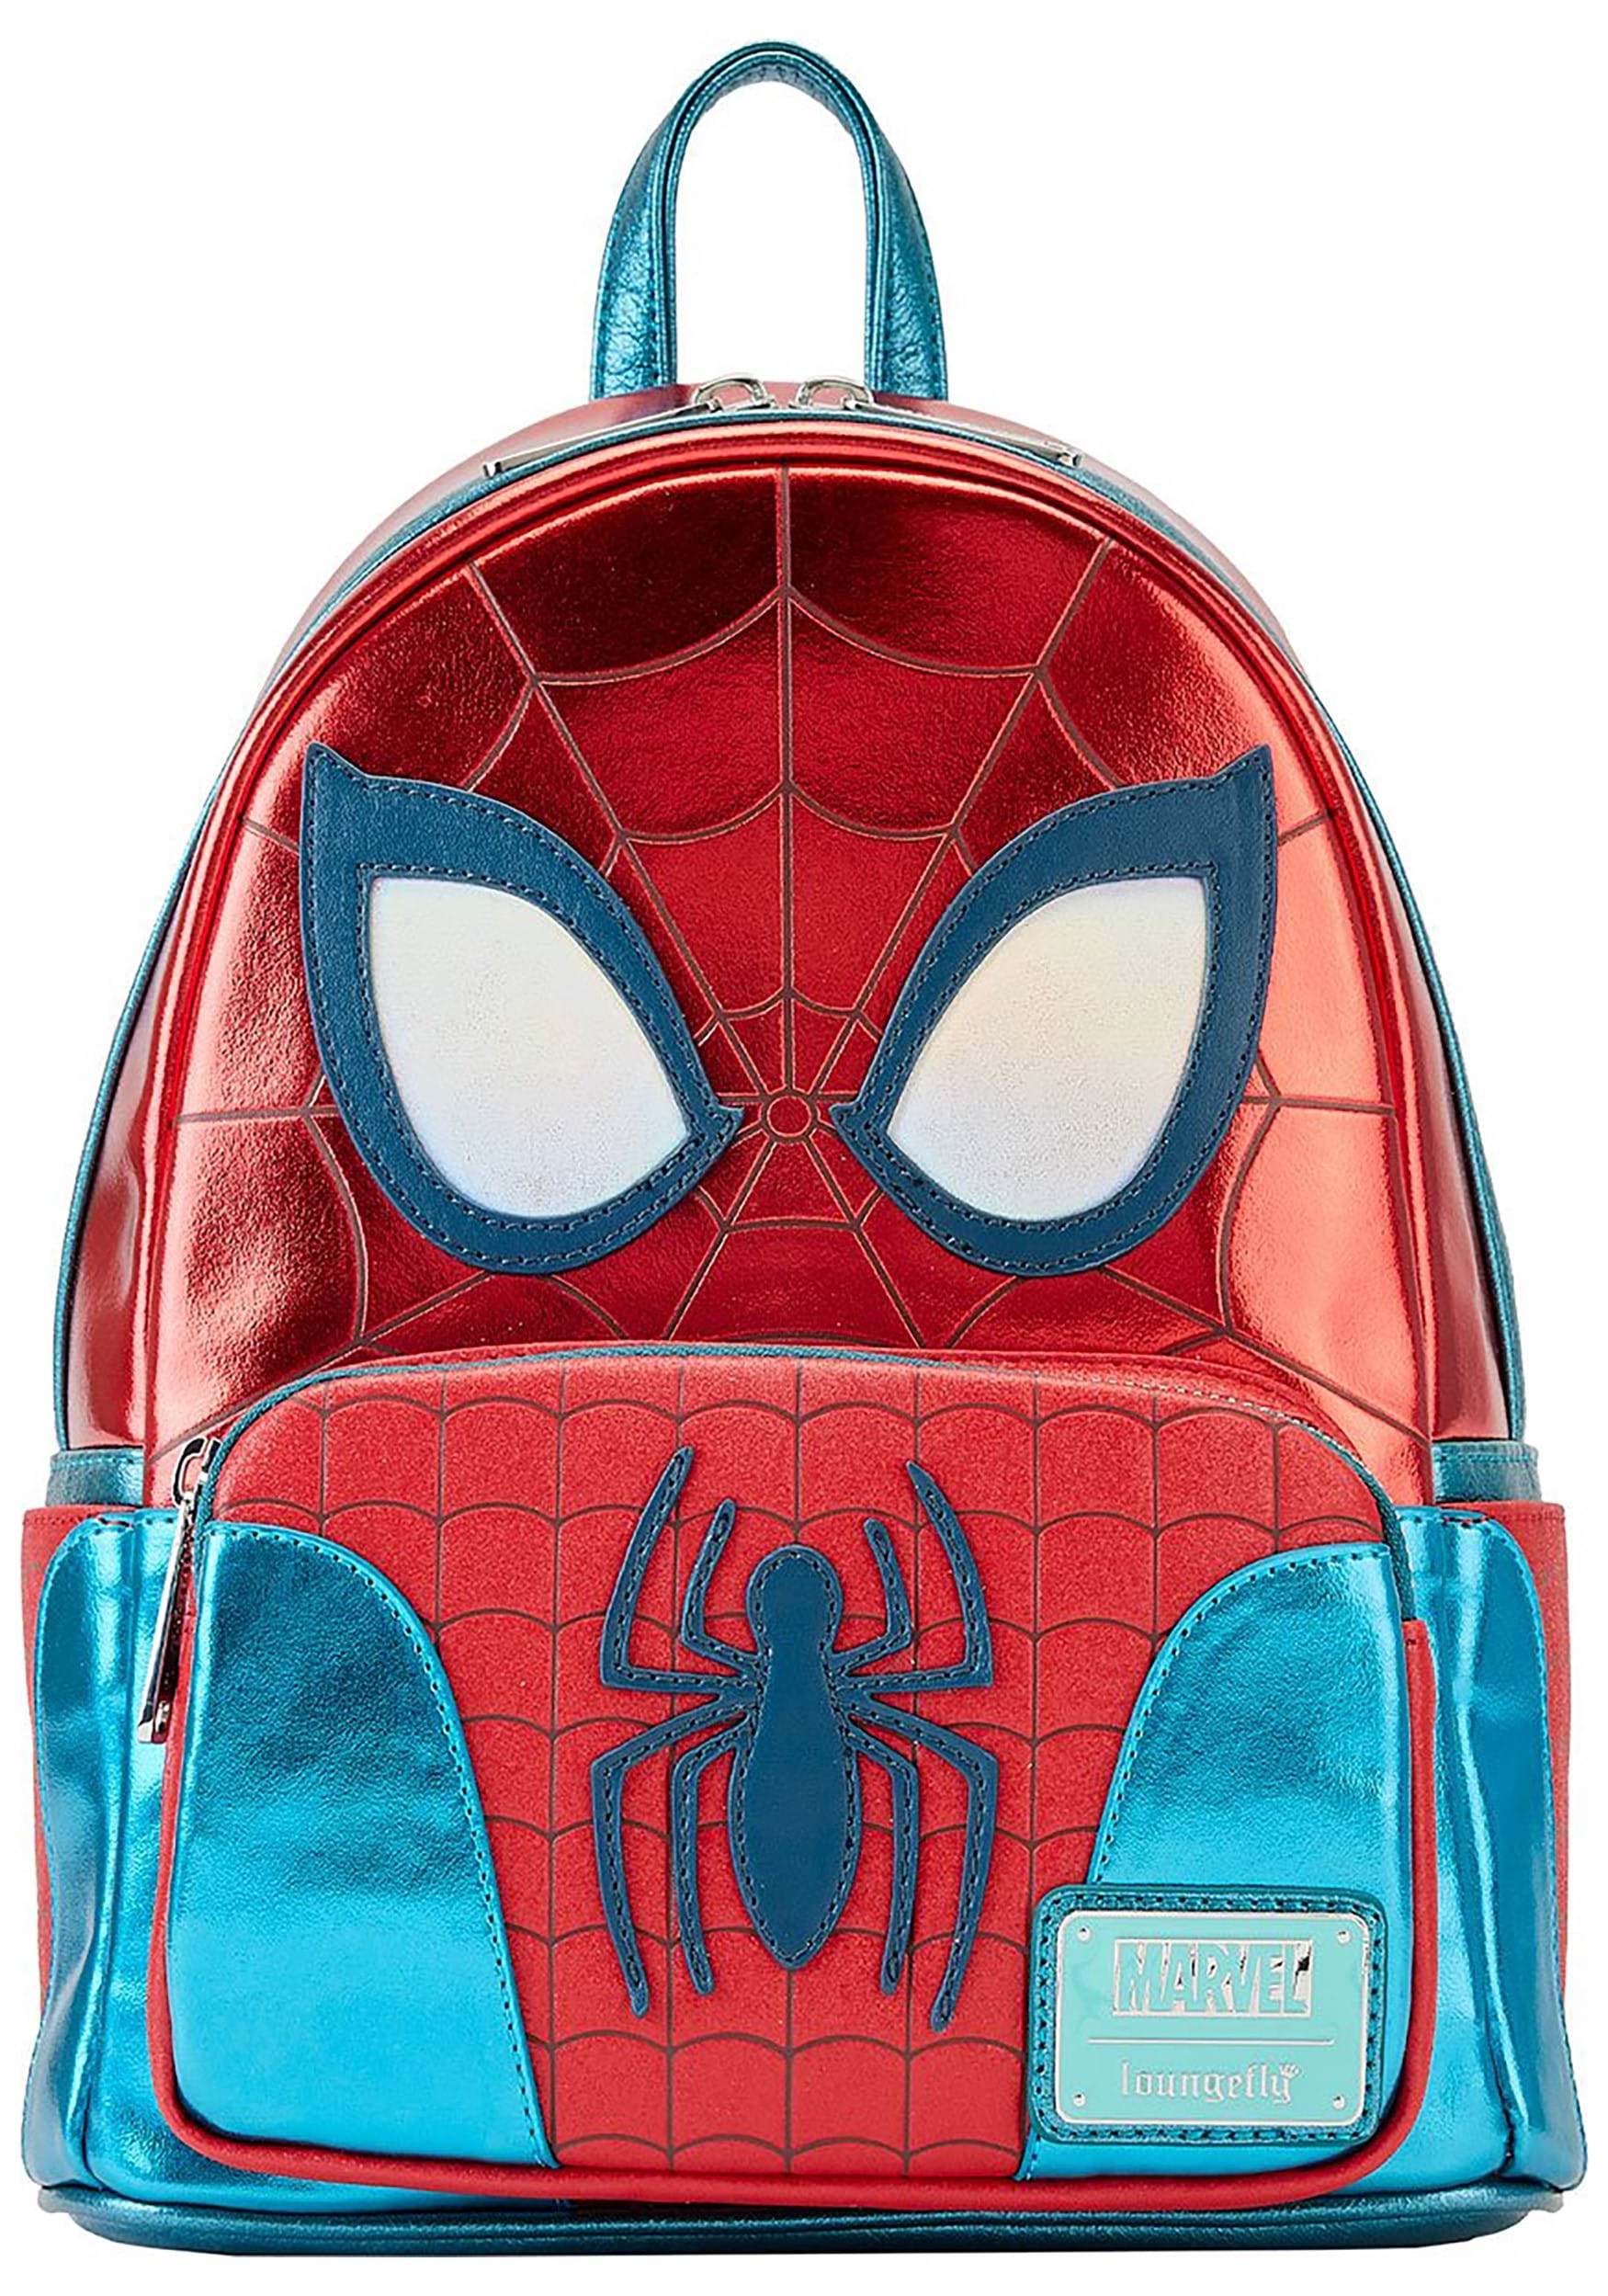 Loungefly Marvel Shine Spider-Man Mini Backpack | Loungefly Spider-Man